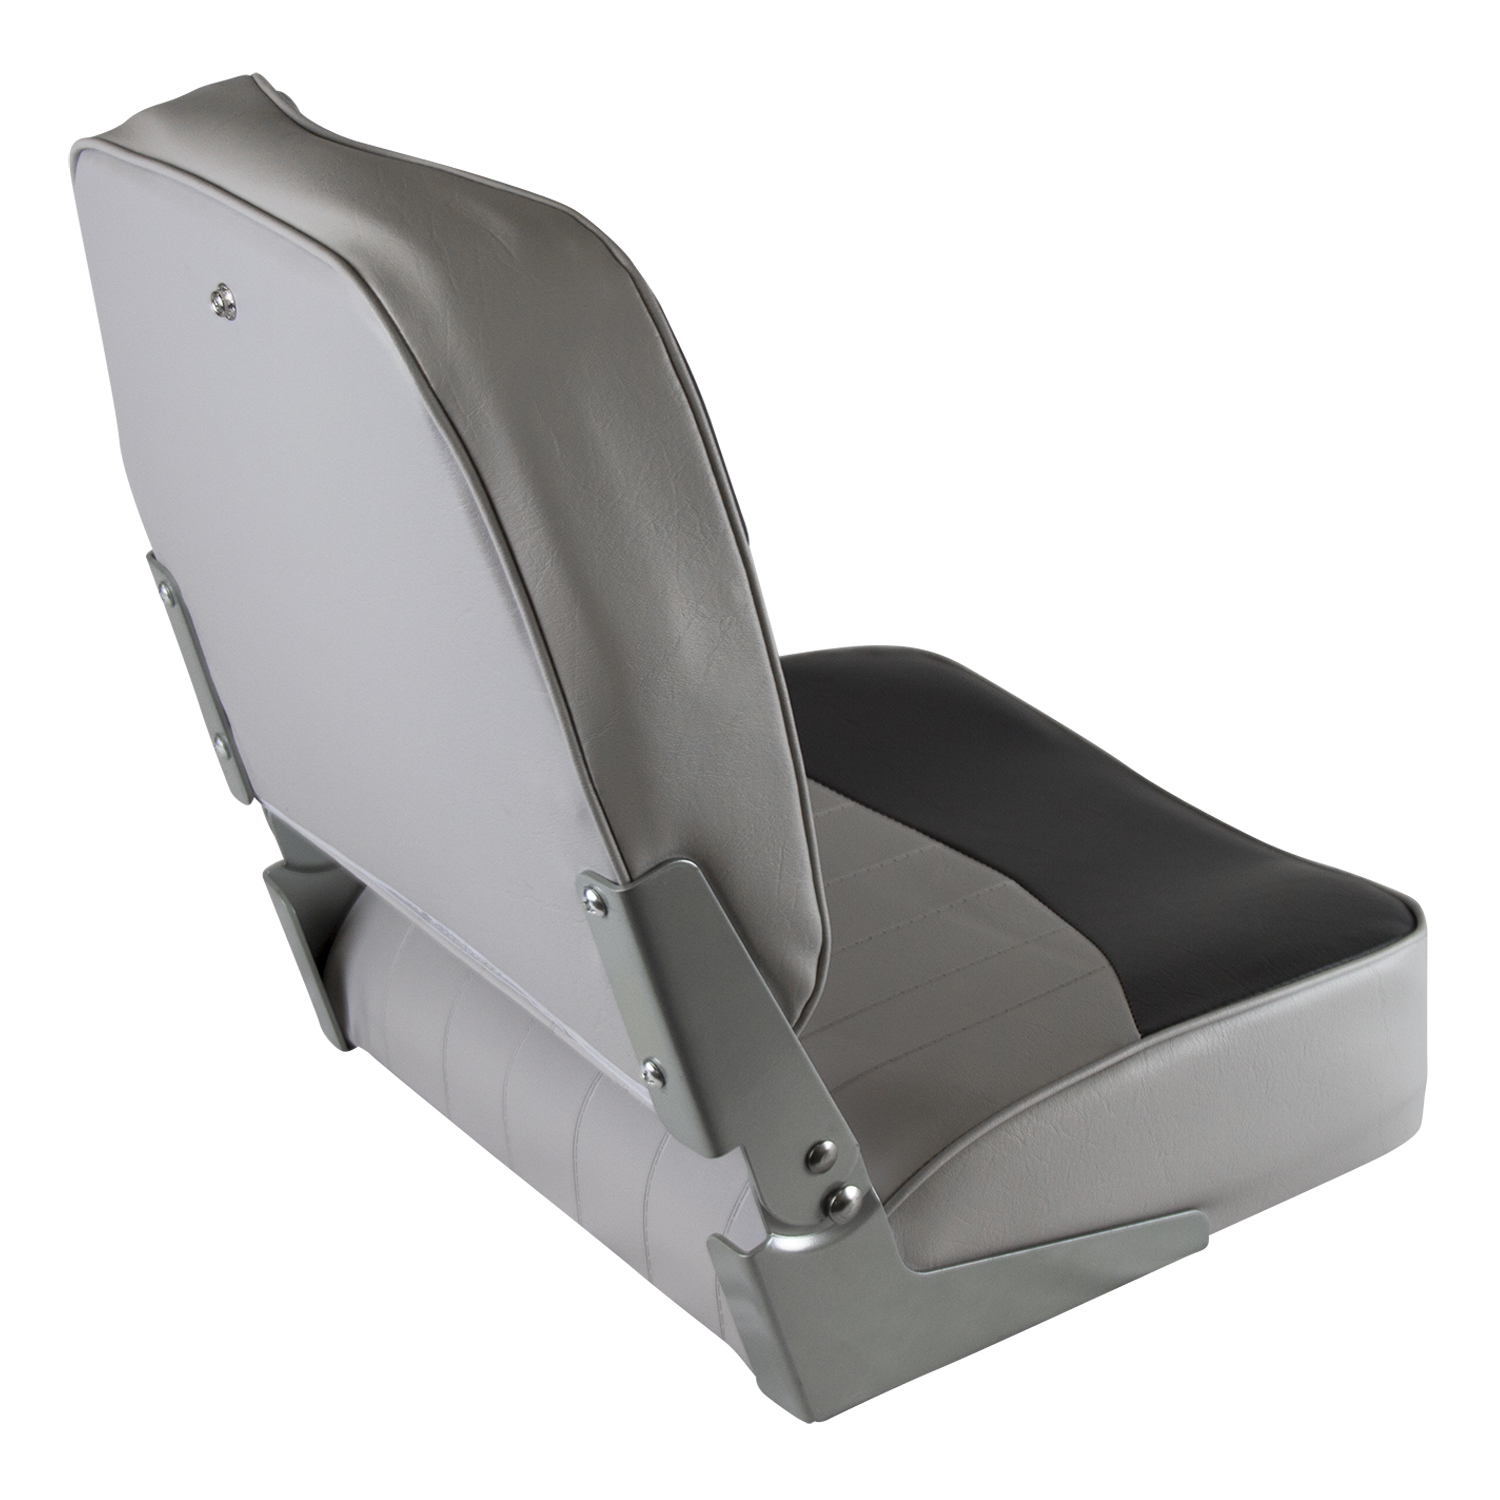 Wise 8WD734PLS-661 Low Back Boat Seat, Grey / Red - image 3 of 6